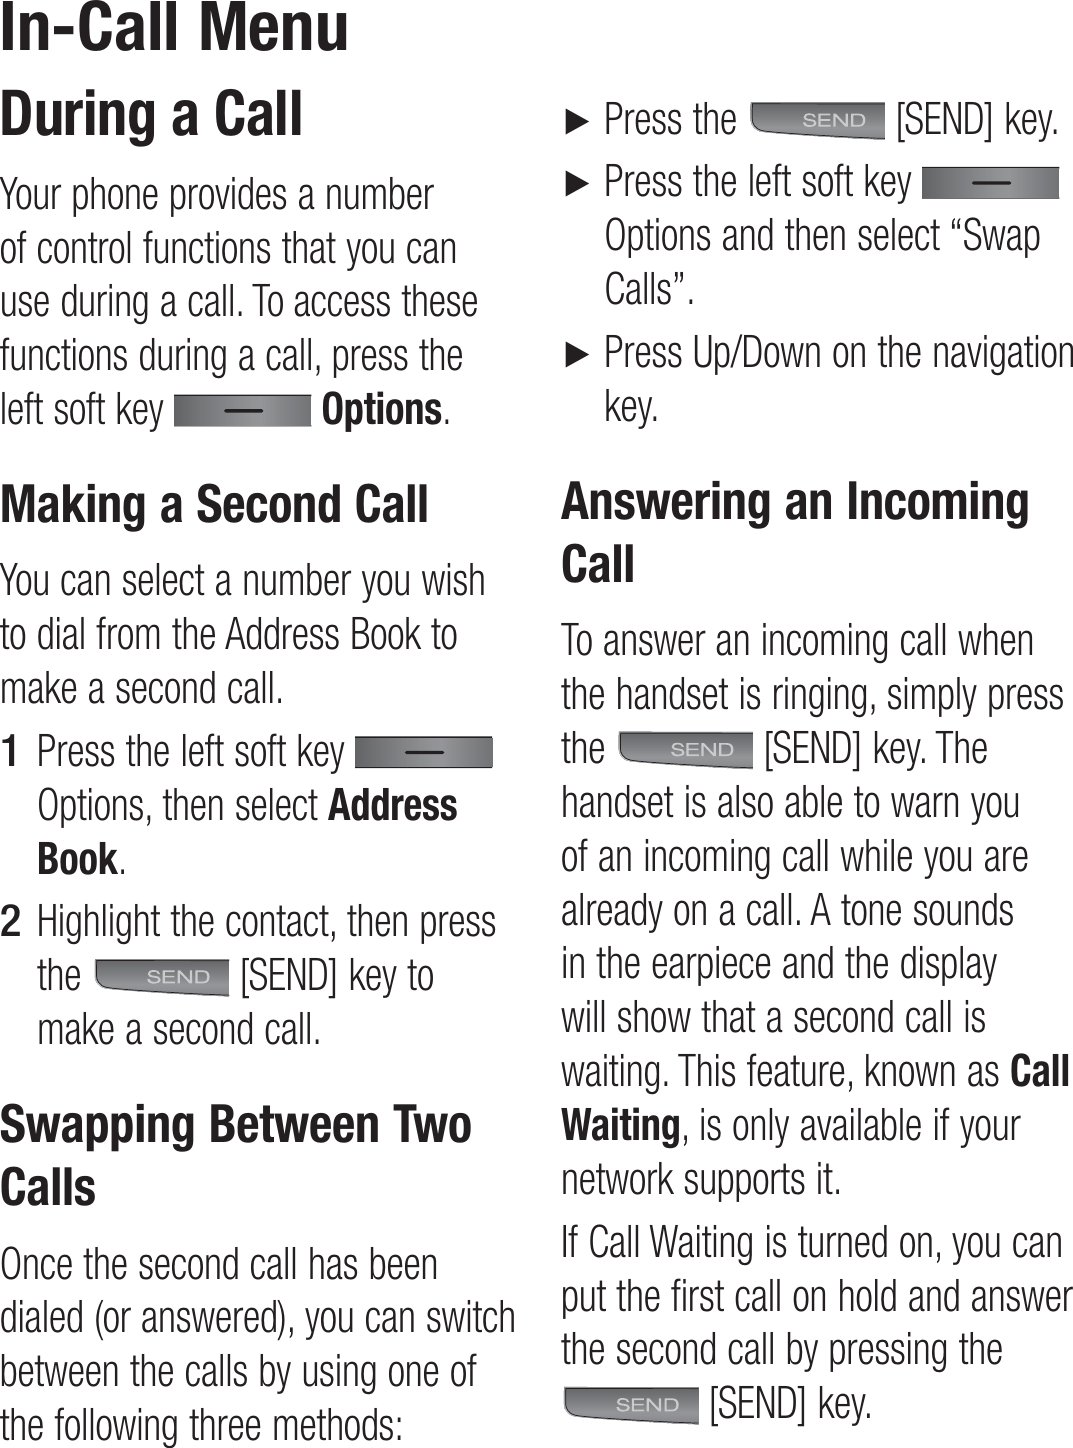 During a CallYour phone provides a number of control functions that you can use during a call. To access these functions during a call, press the left soft key   Options.Making a Second CallYou can select a number you wish to dial from the Address Book to make a second call.Press the left soft key    Options, then select Address Book. Highlight the contact, then press the   [SEND] key to make a second call. Swapping Between Two CallsOnce the second call has been dialed (or answered), you can switch between the calls by using one of the following three methods:1 2 ► Press the   [SEND] key.►  Press the left soft key   Options and then select “Swap Calls”.►  Press Up/Down on the navigation key.Answering an Incoming CallTo answer an incoming call when the handset is ringing, simply press the   [SEND] key. The handset is also able to warn you of an incoming call while you are already on a call. A tone sounds in the earpiece and the display will show that a second call is waiting. This feature, known as Call Waiting, is only available if your network supports it.If Call Waiting is turned on, you can put the first call on hold and answer the second call by pressing the  [SEND] key.In-Call Menu